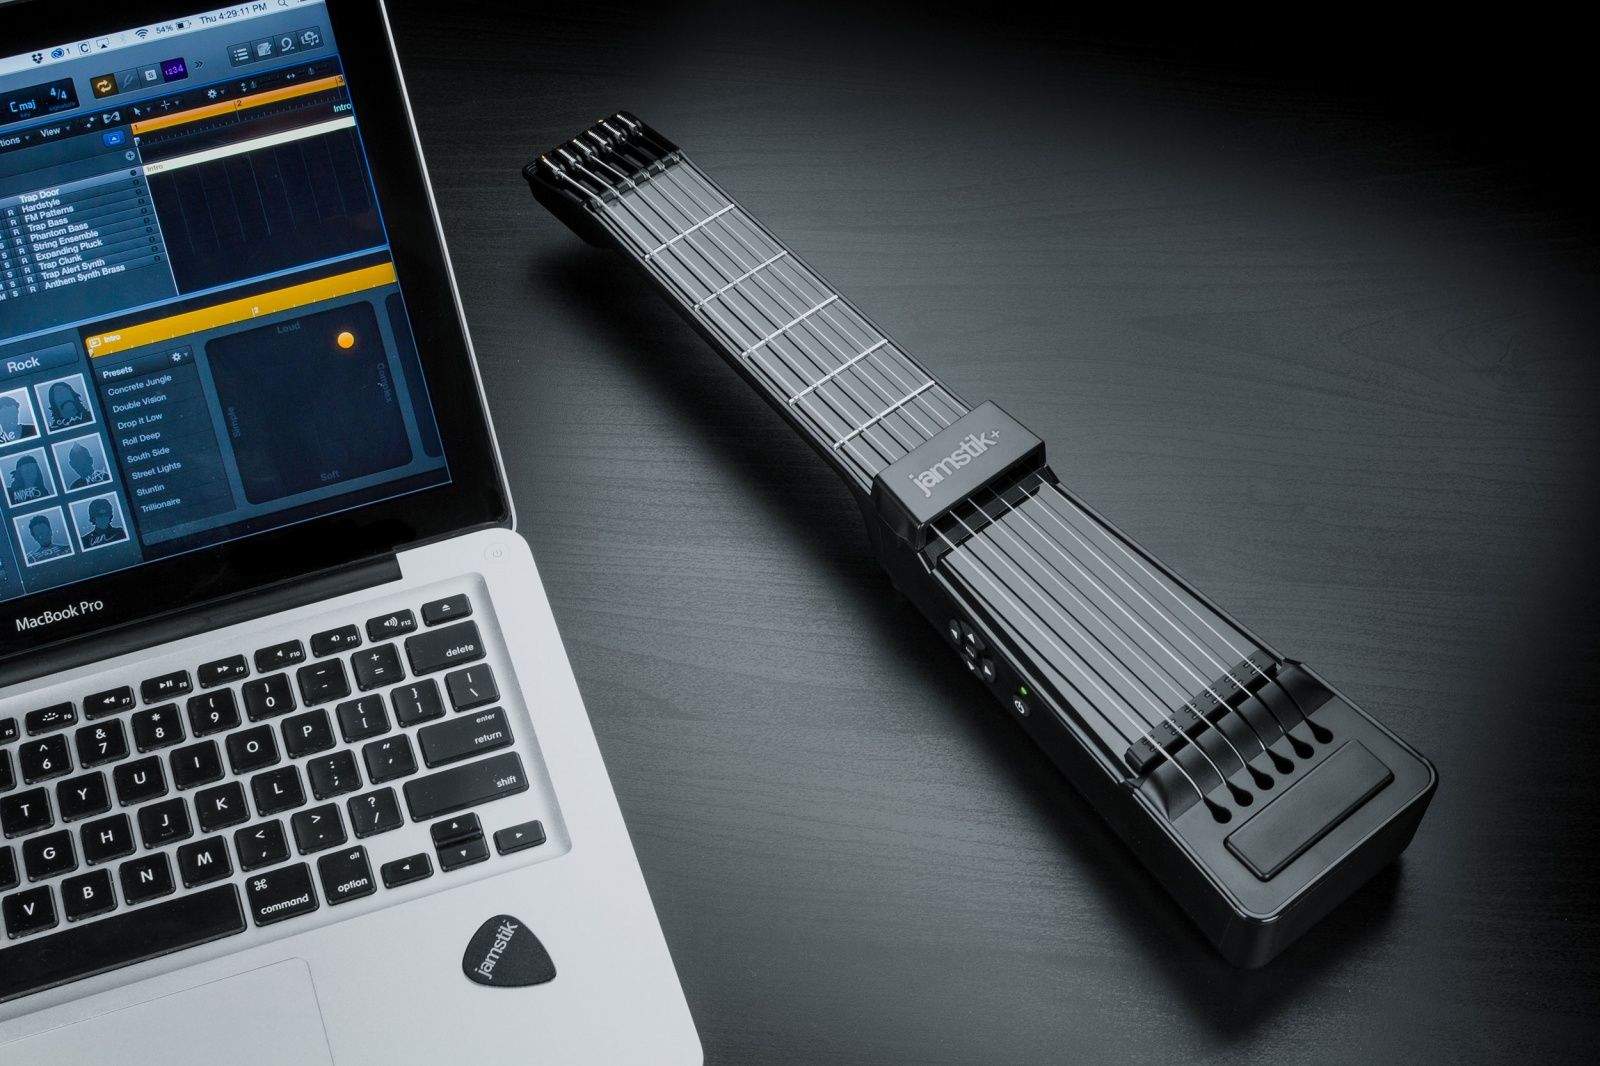 The newest Jamstik smart guitar has a magnetic pickup and Bluetooth technology.